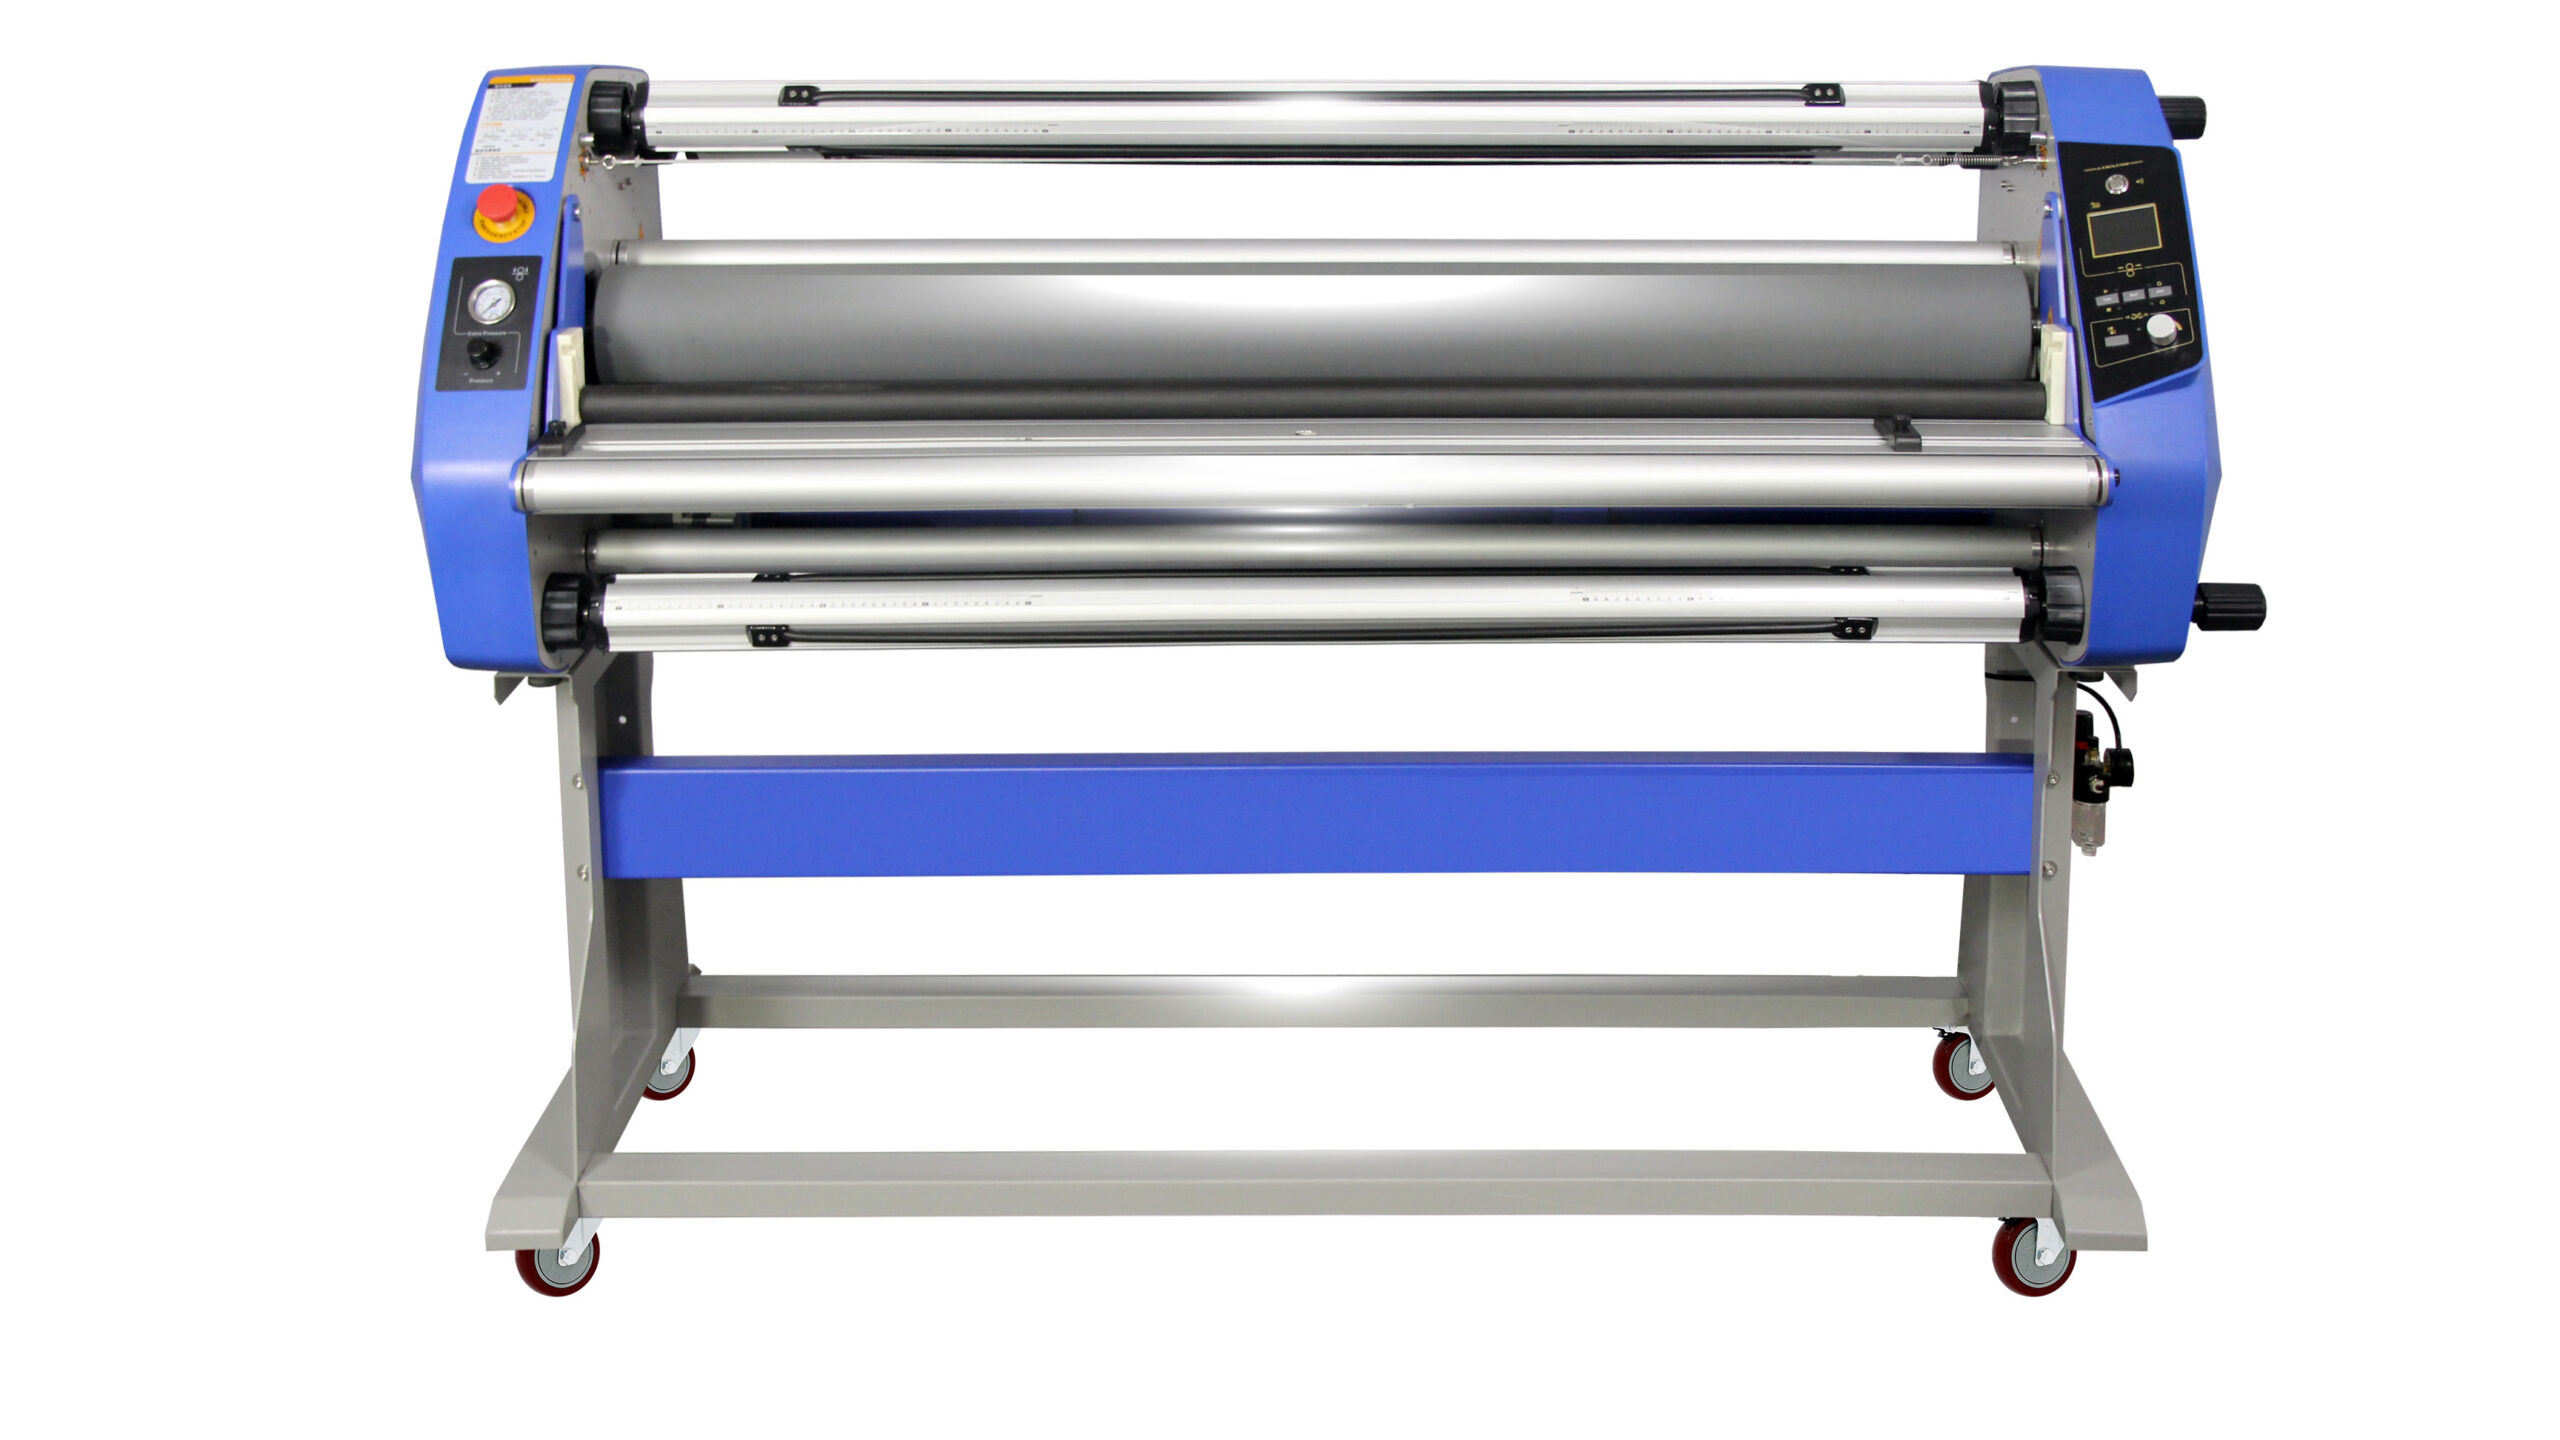 1450mm width automatic laminator with heavy duty silicon roller